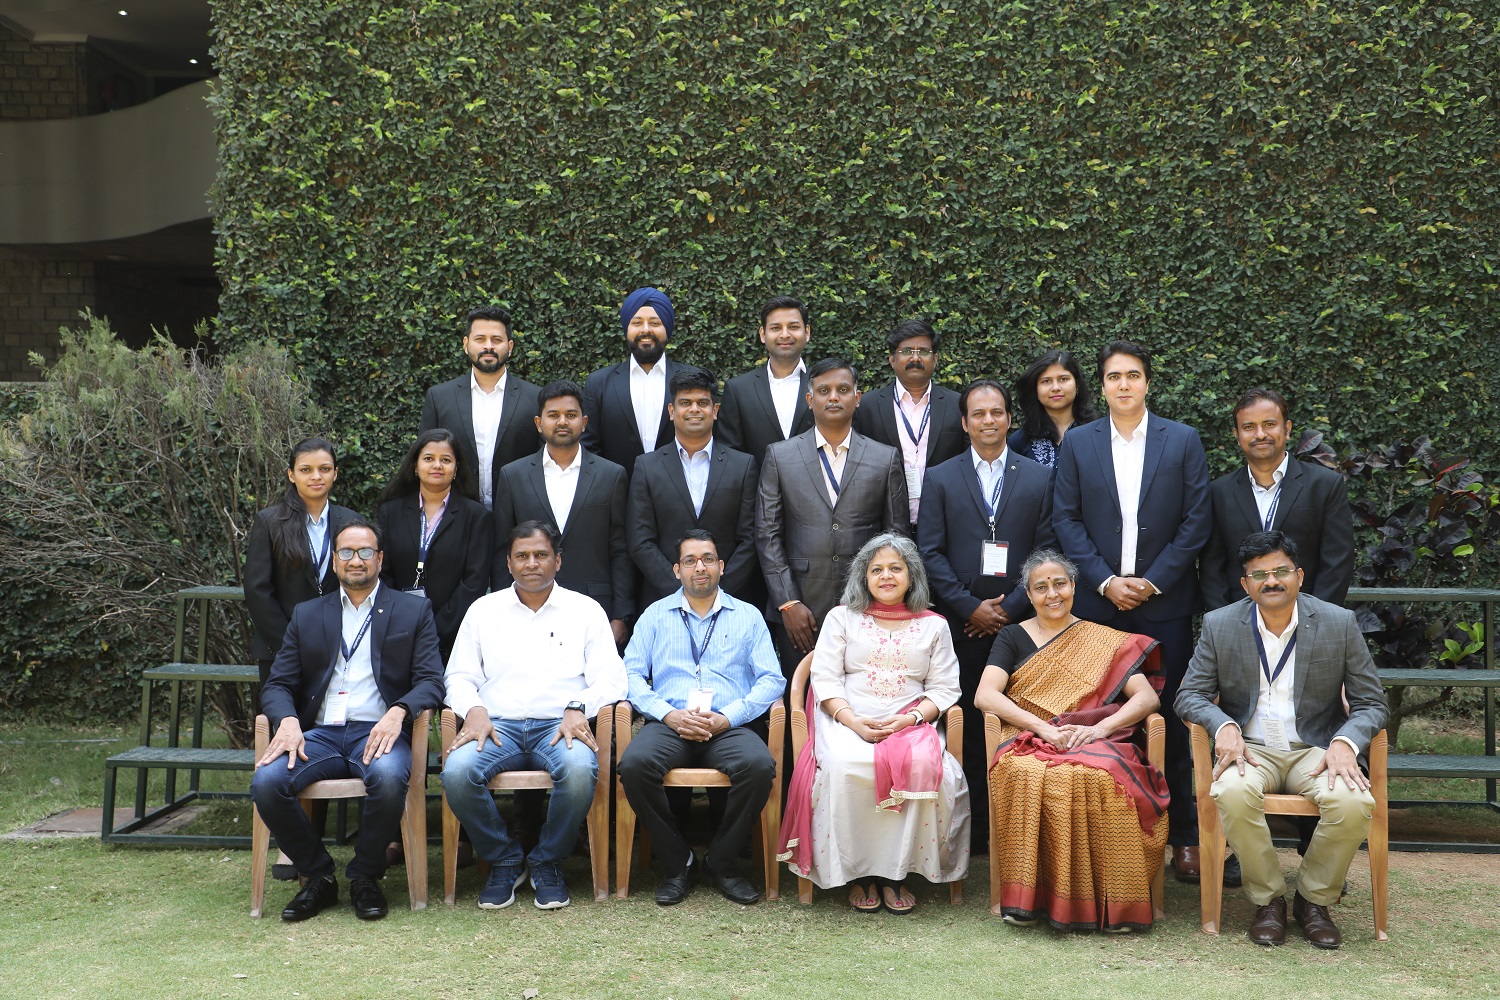 Participants of the Strategic Leadership Development Programme for Siemens Real Estate on 13th March 2023.